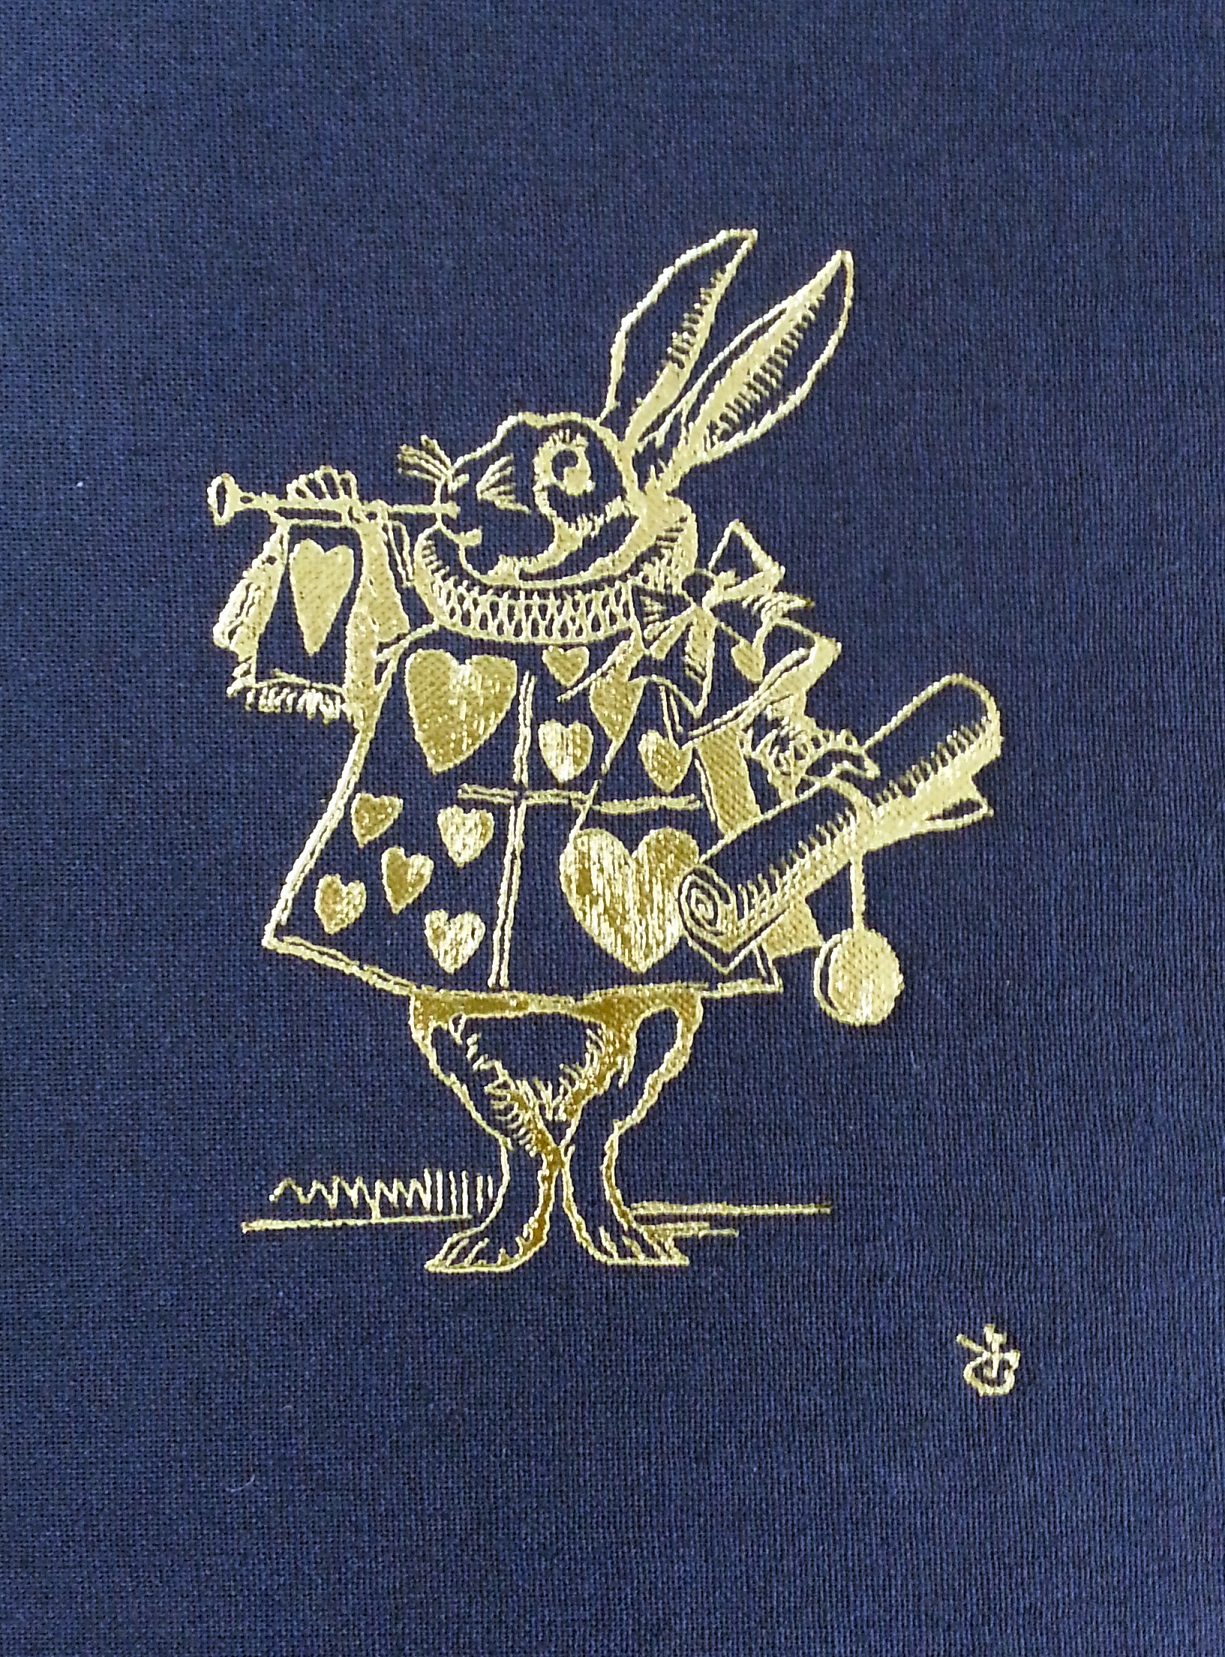 Book cover with white rabbit